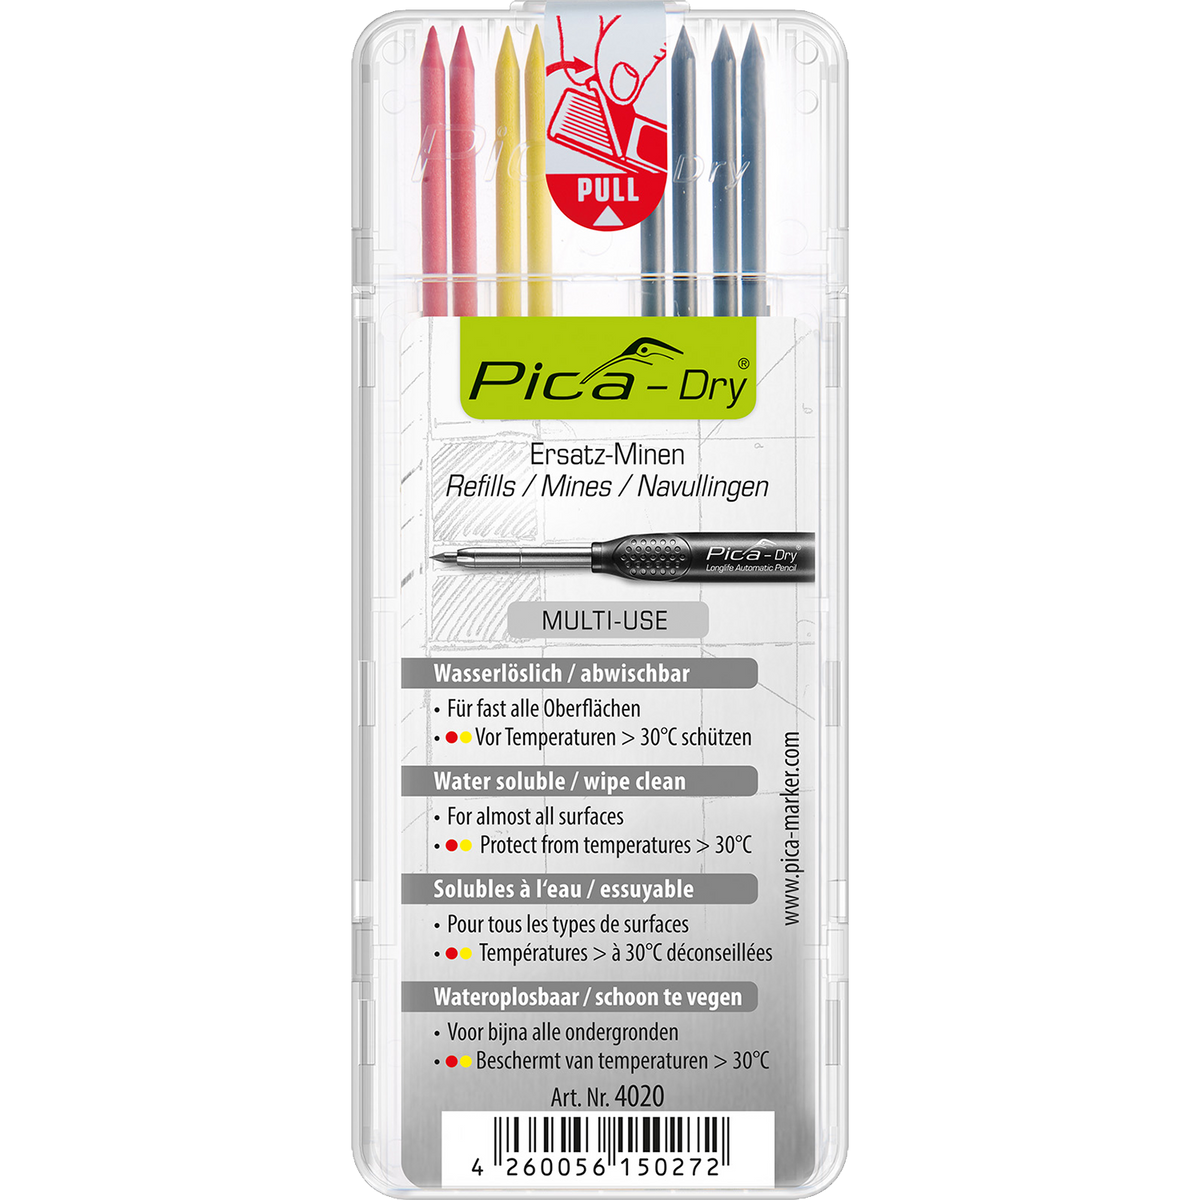 Pica Dry Pen/Pencil Refills and Markers